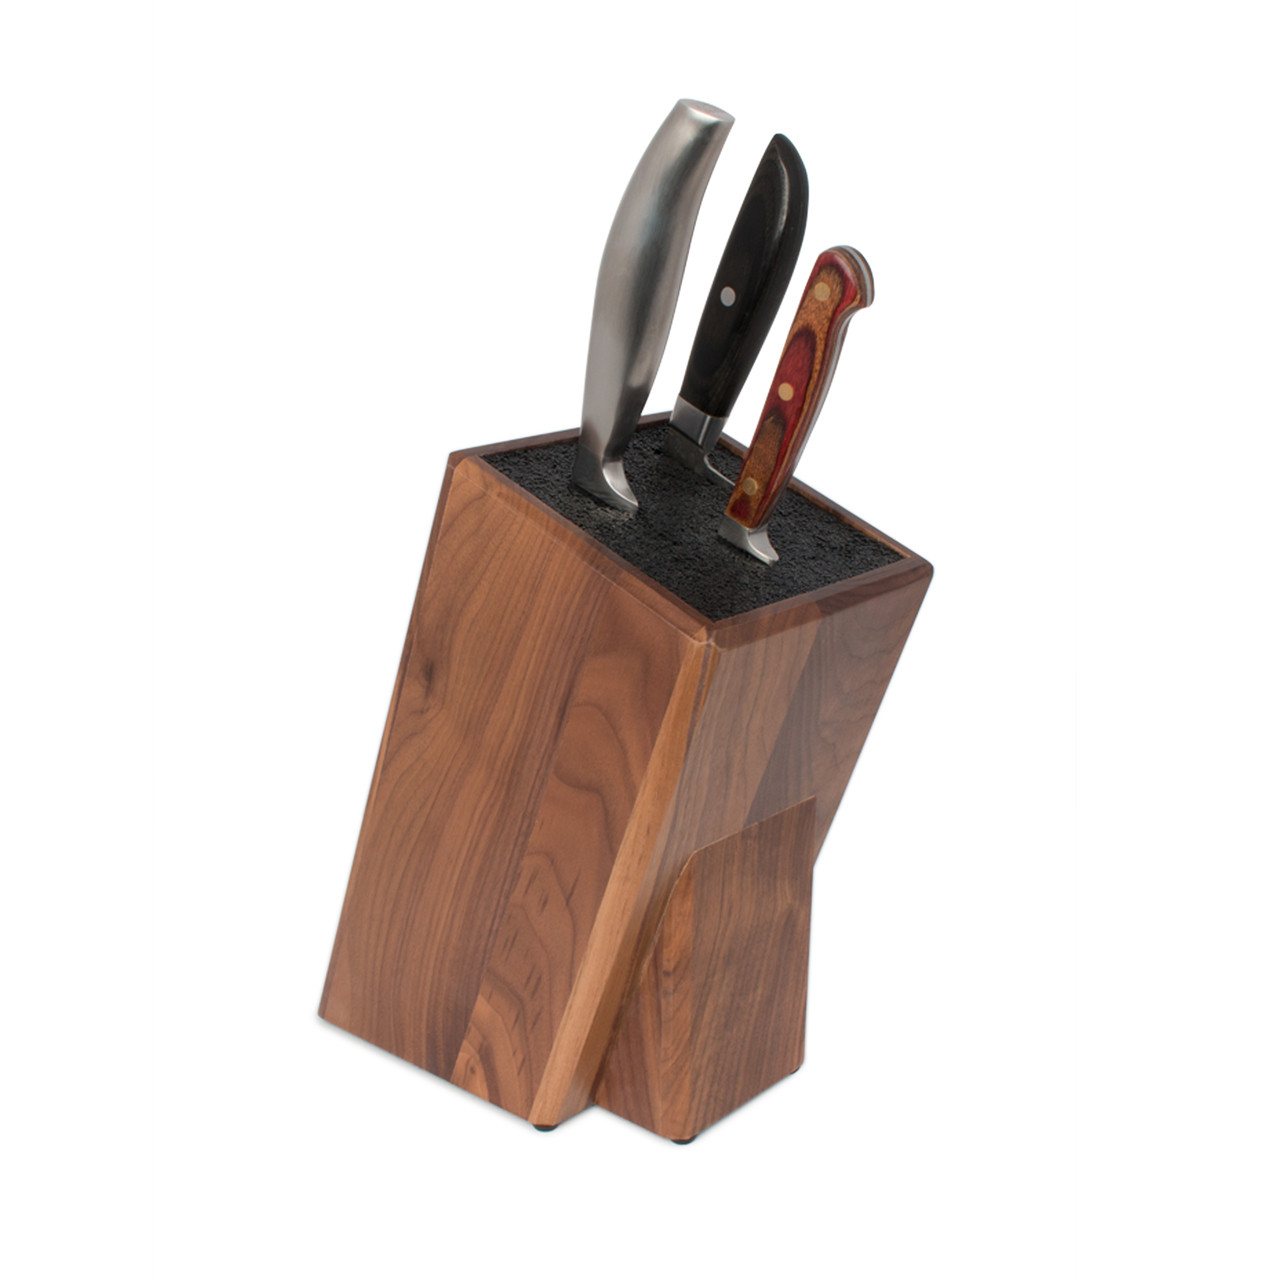 https://cdn10.bigcommerce.com/s-aa84j/products/50/images/819/100318_Walnut-Kapoosh-with-knives__48811.1540310050.1280.1280.jpg?c=3